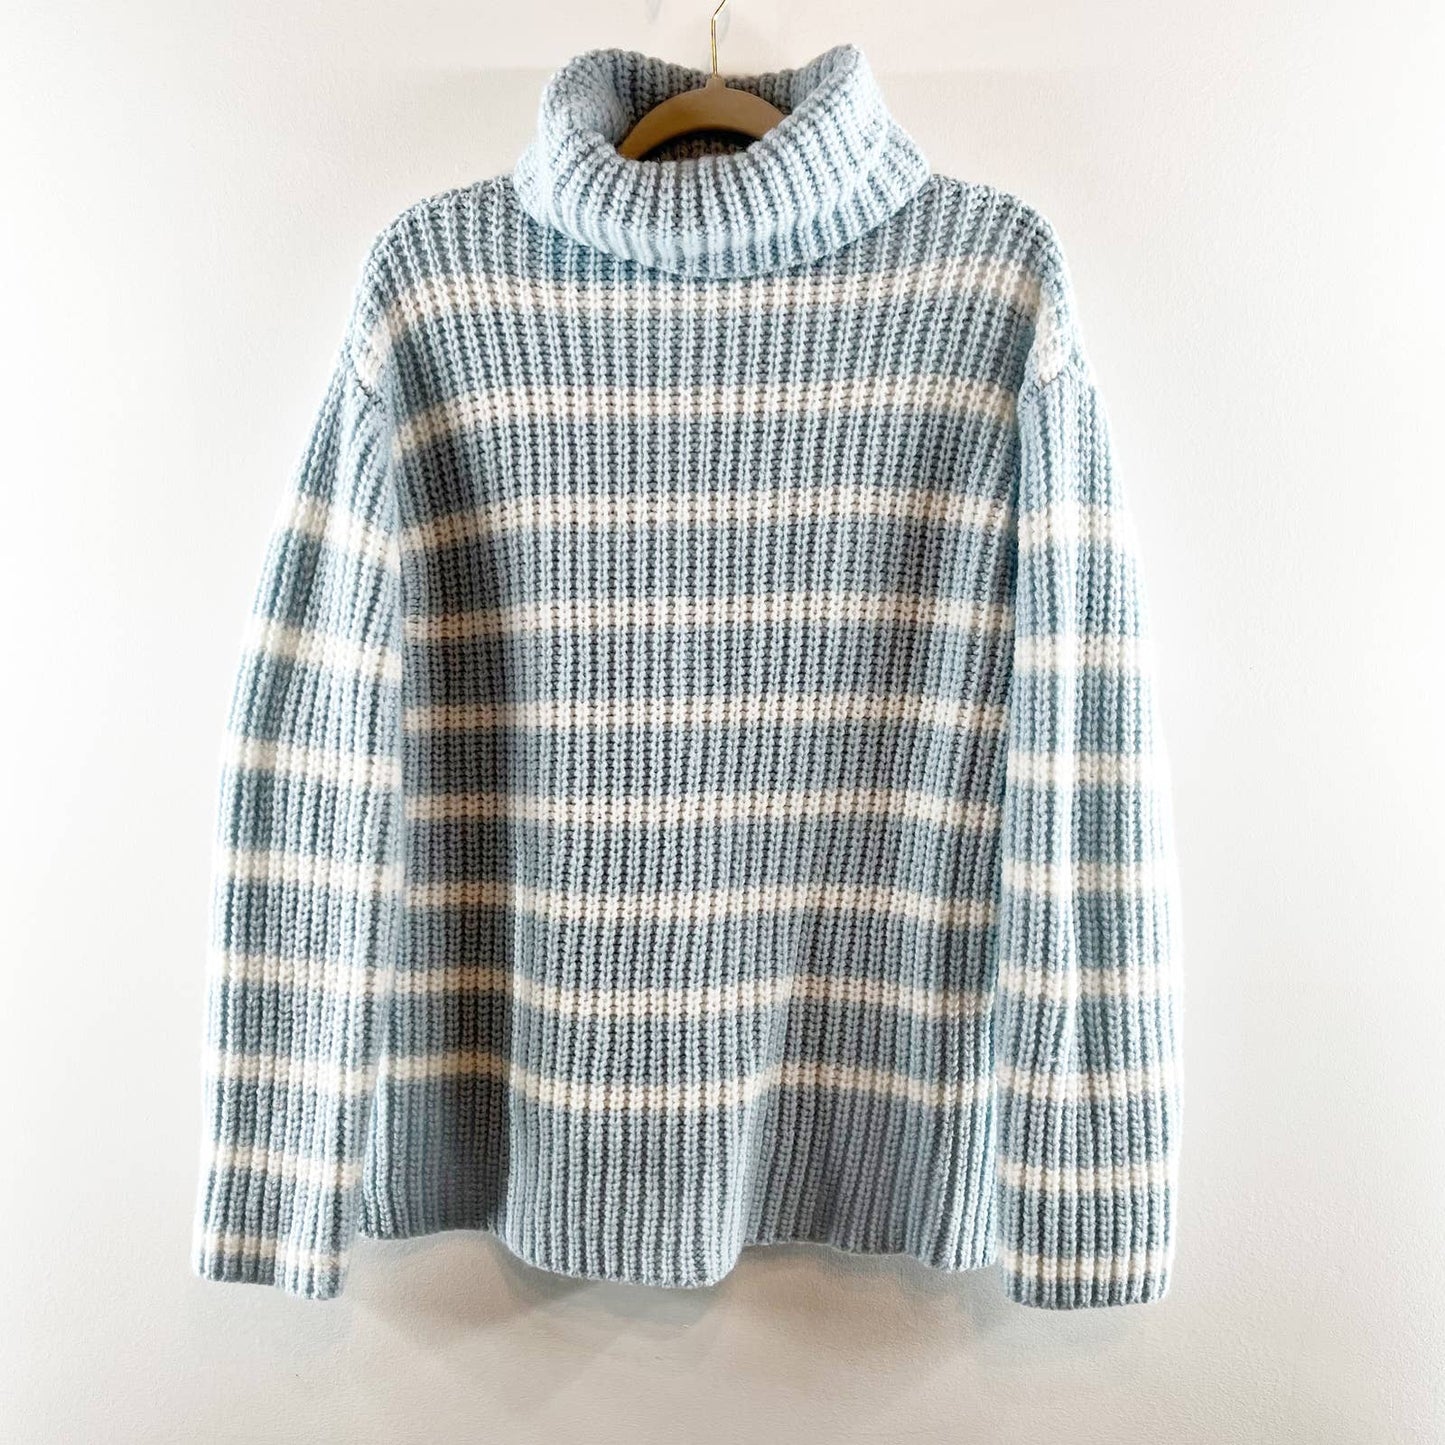 Caslon Striped Shaker Stitch Long Sleeve Turtleneck Pullover Sweater Blue Small